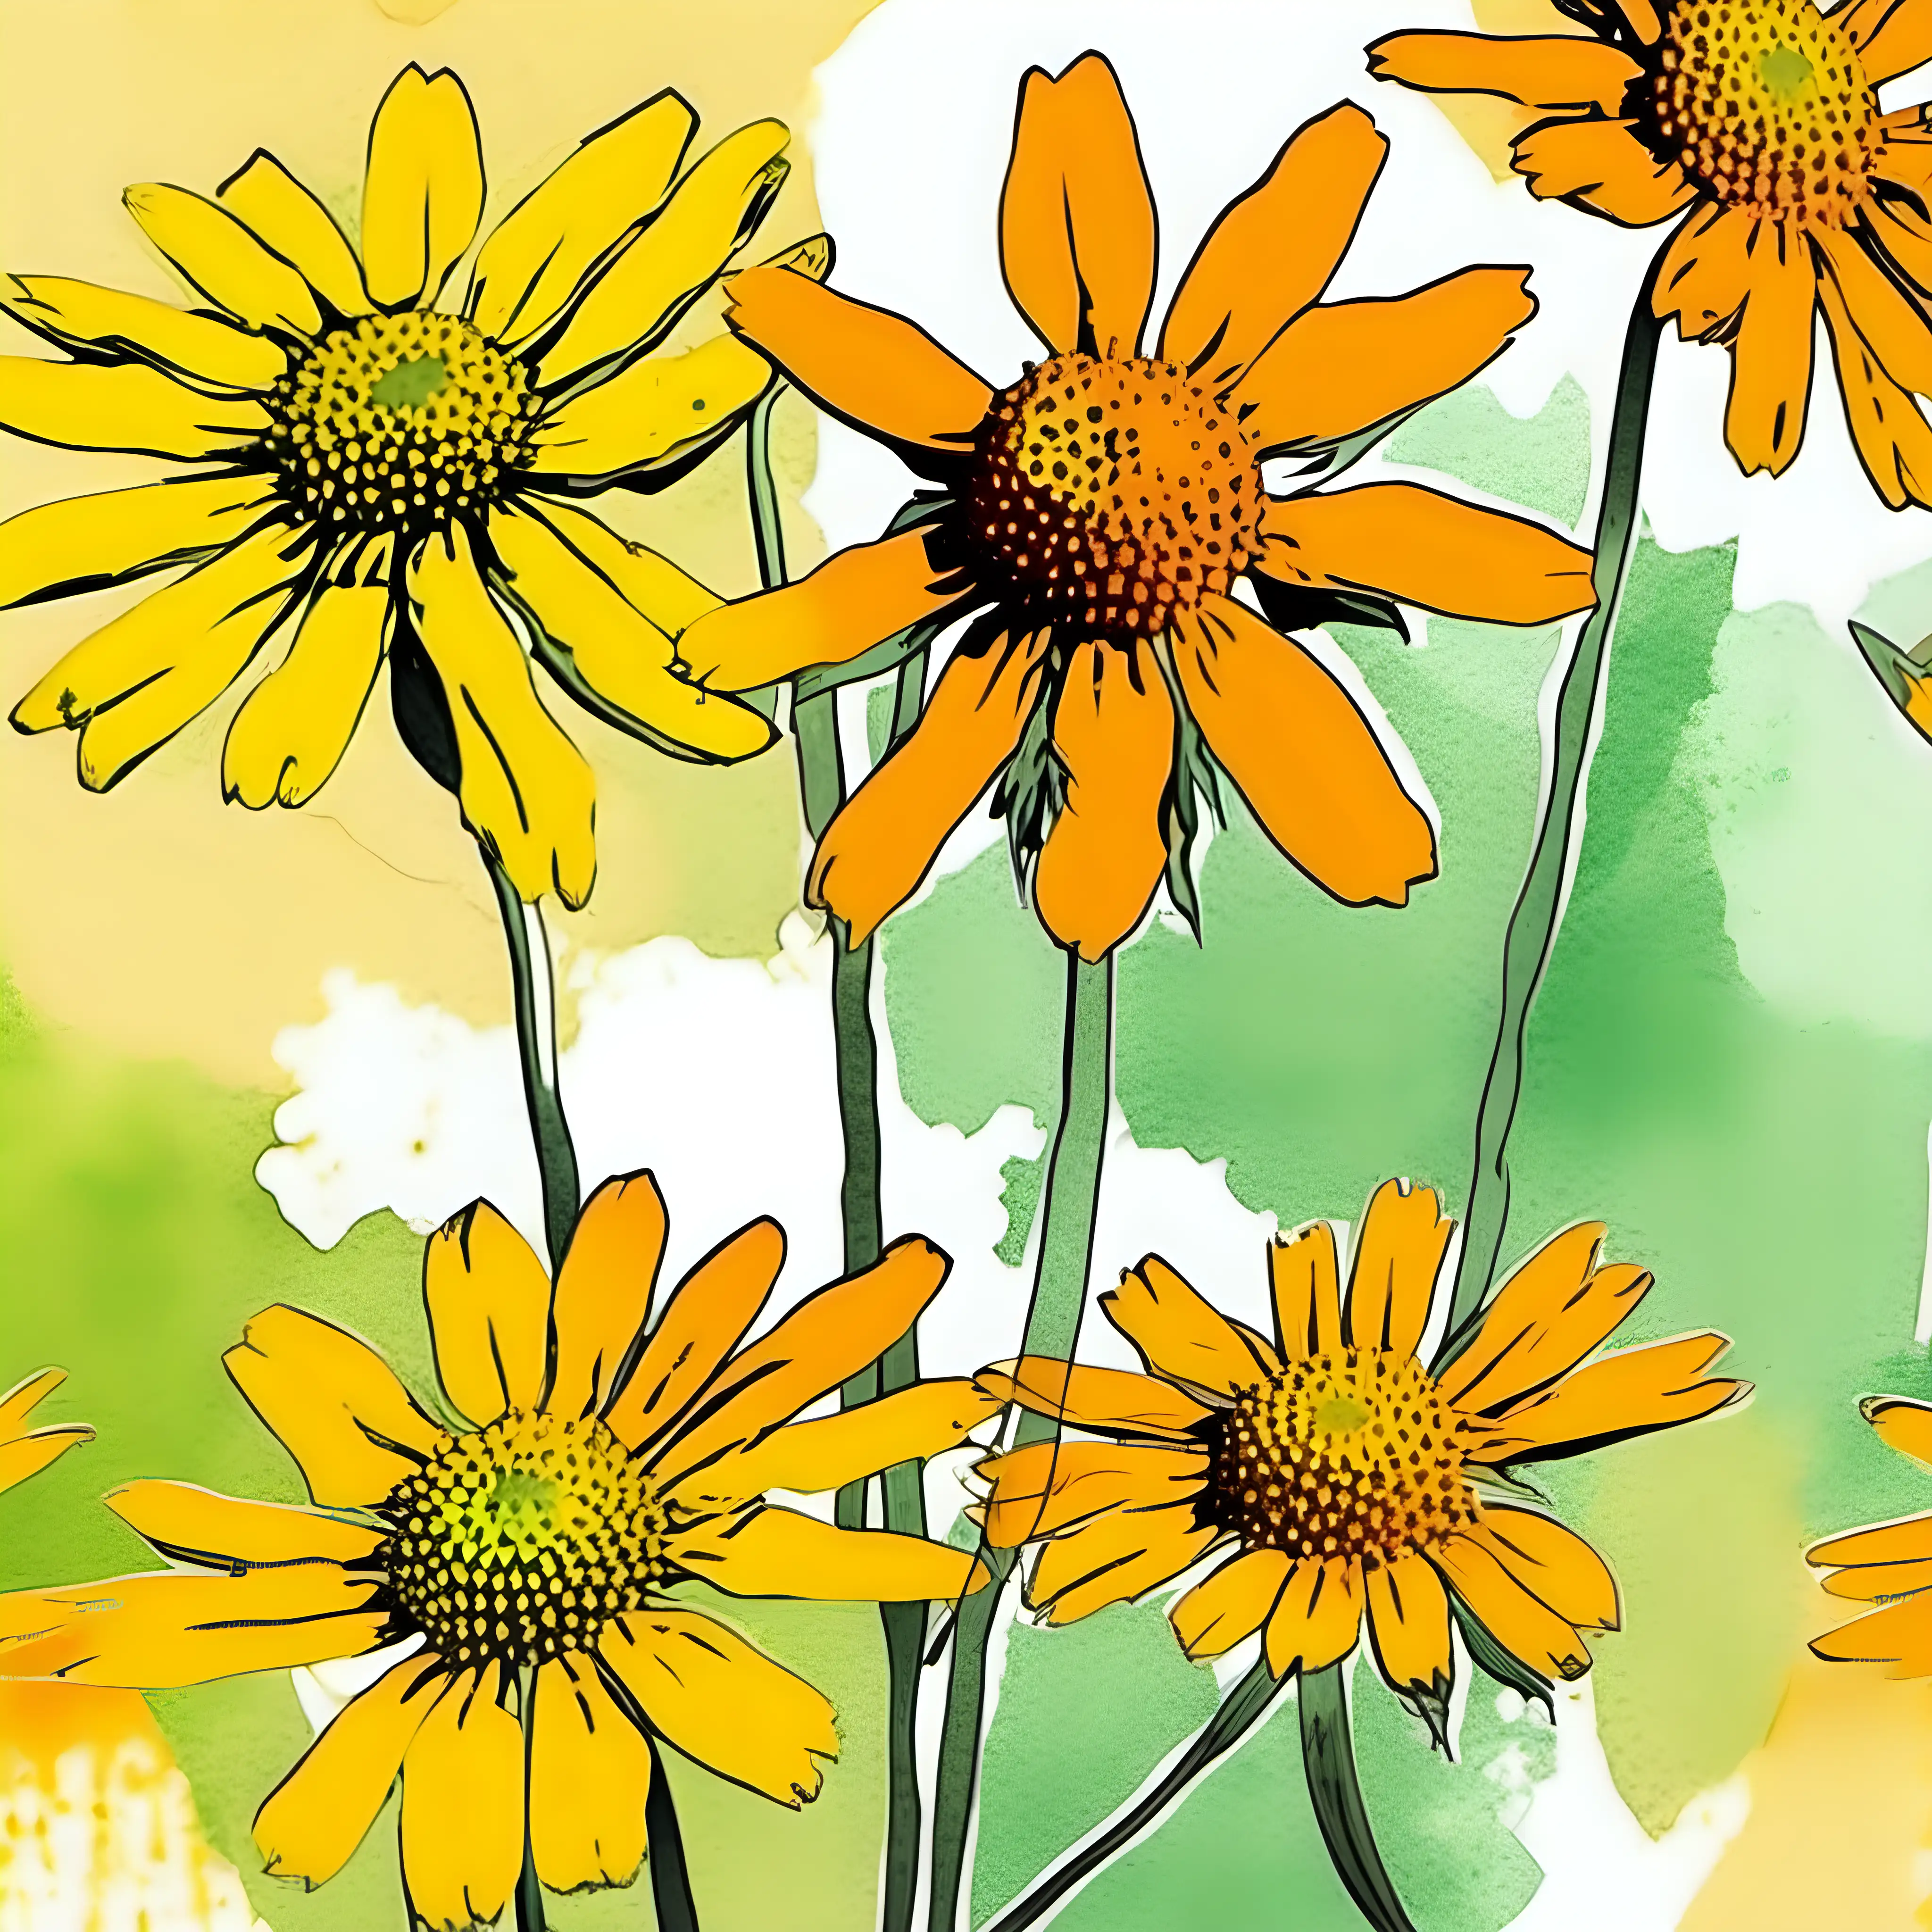 /imagine prompt pastel watercolor Sneezeweed  
FLOWERS , washed out color,YELLOW,ORANGE, GREEN, clipart on a white background andy warhol inspired --tile